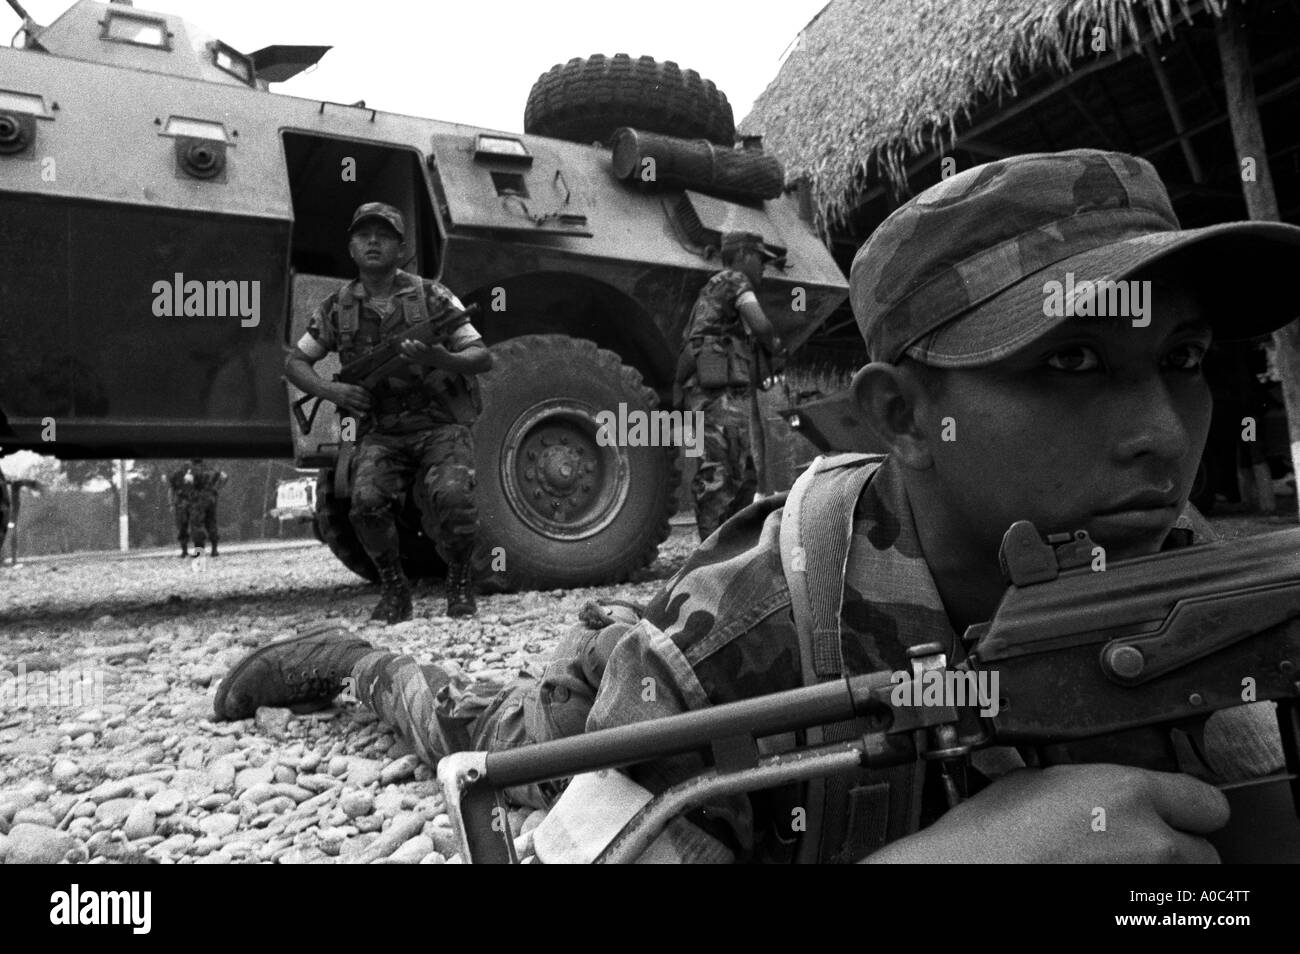 Stock image of the Guatemalan army on training excercise at their Ixcan Jungle base of Playa Grande Gautemala Stock Photo